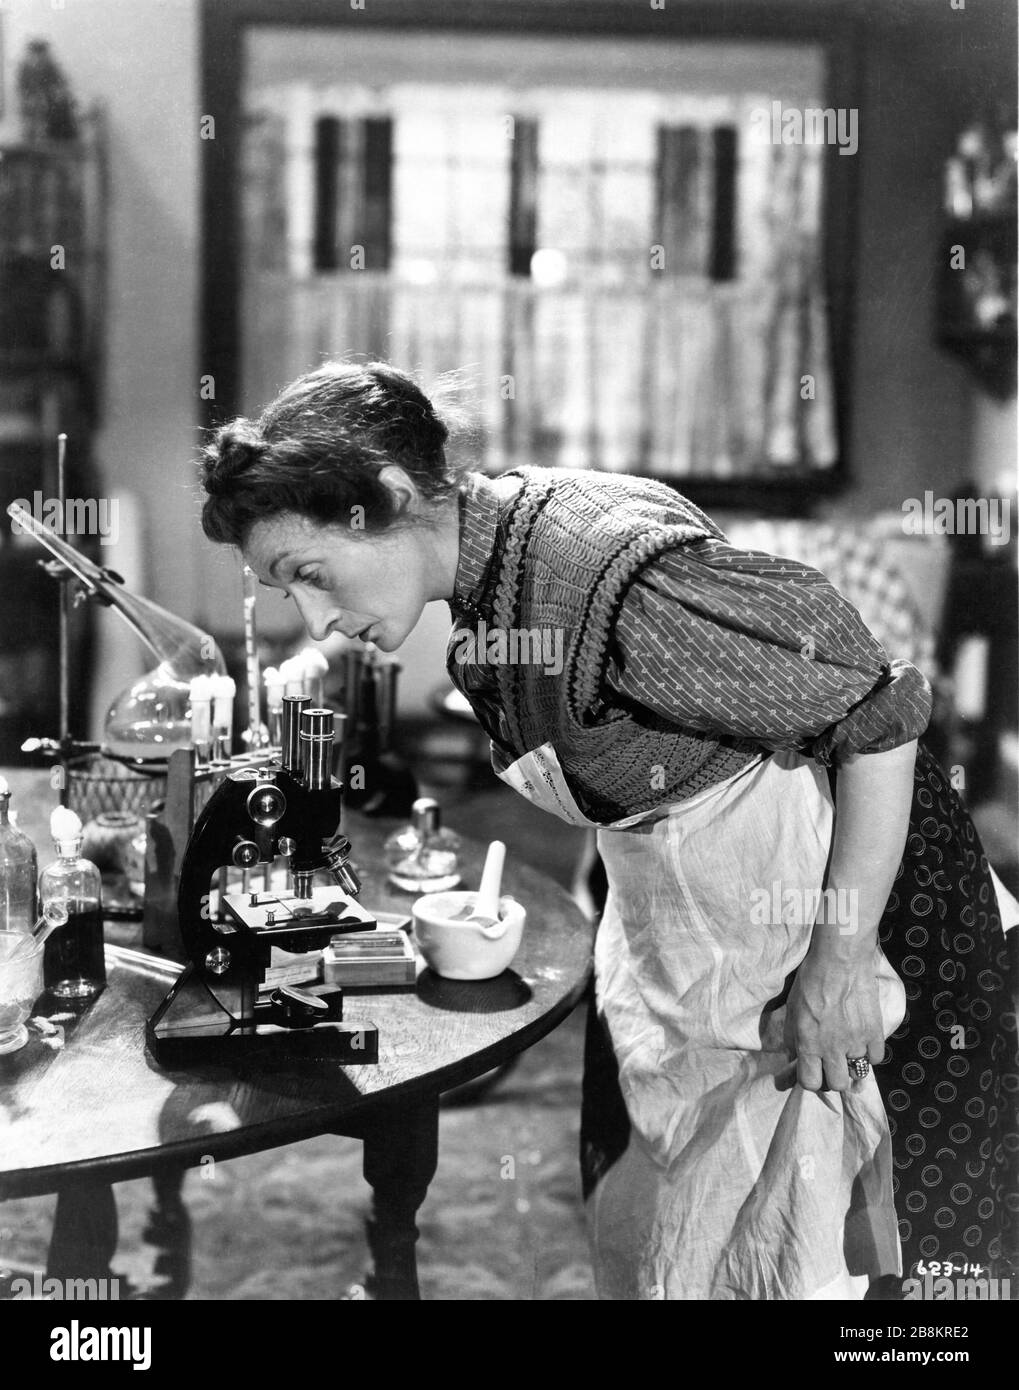 UNA O'CONNOR as Jenny Hall in THE INVISIBLE MAN 1933 director JAMES WHALE novel H. G. Wells screenplay R. C. Sherriff Universal Pictures Stock Photo